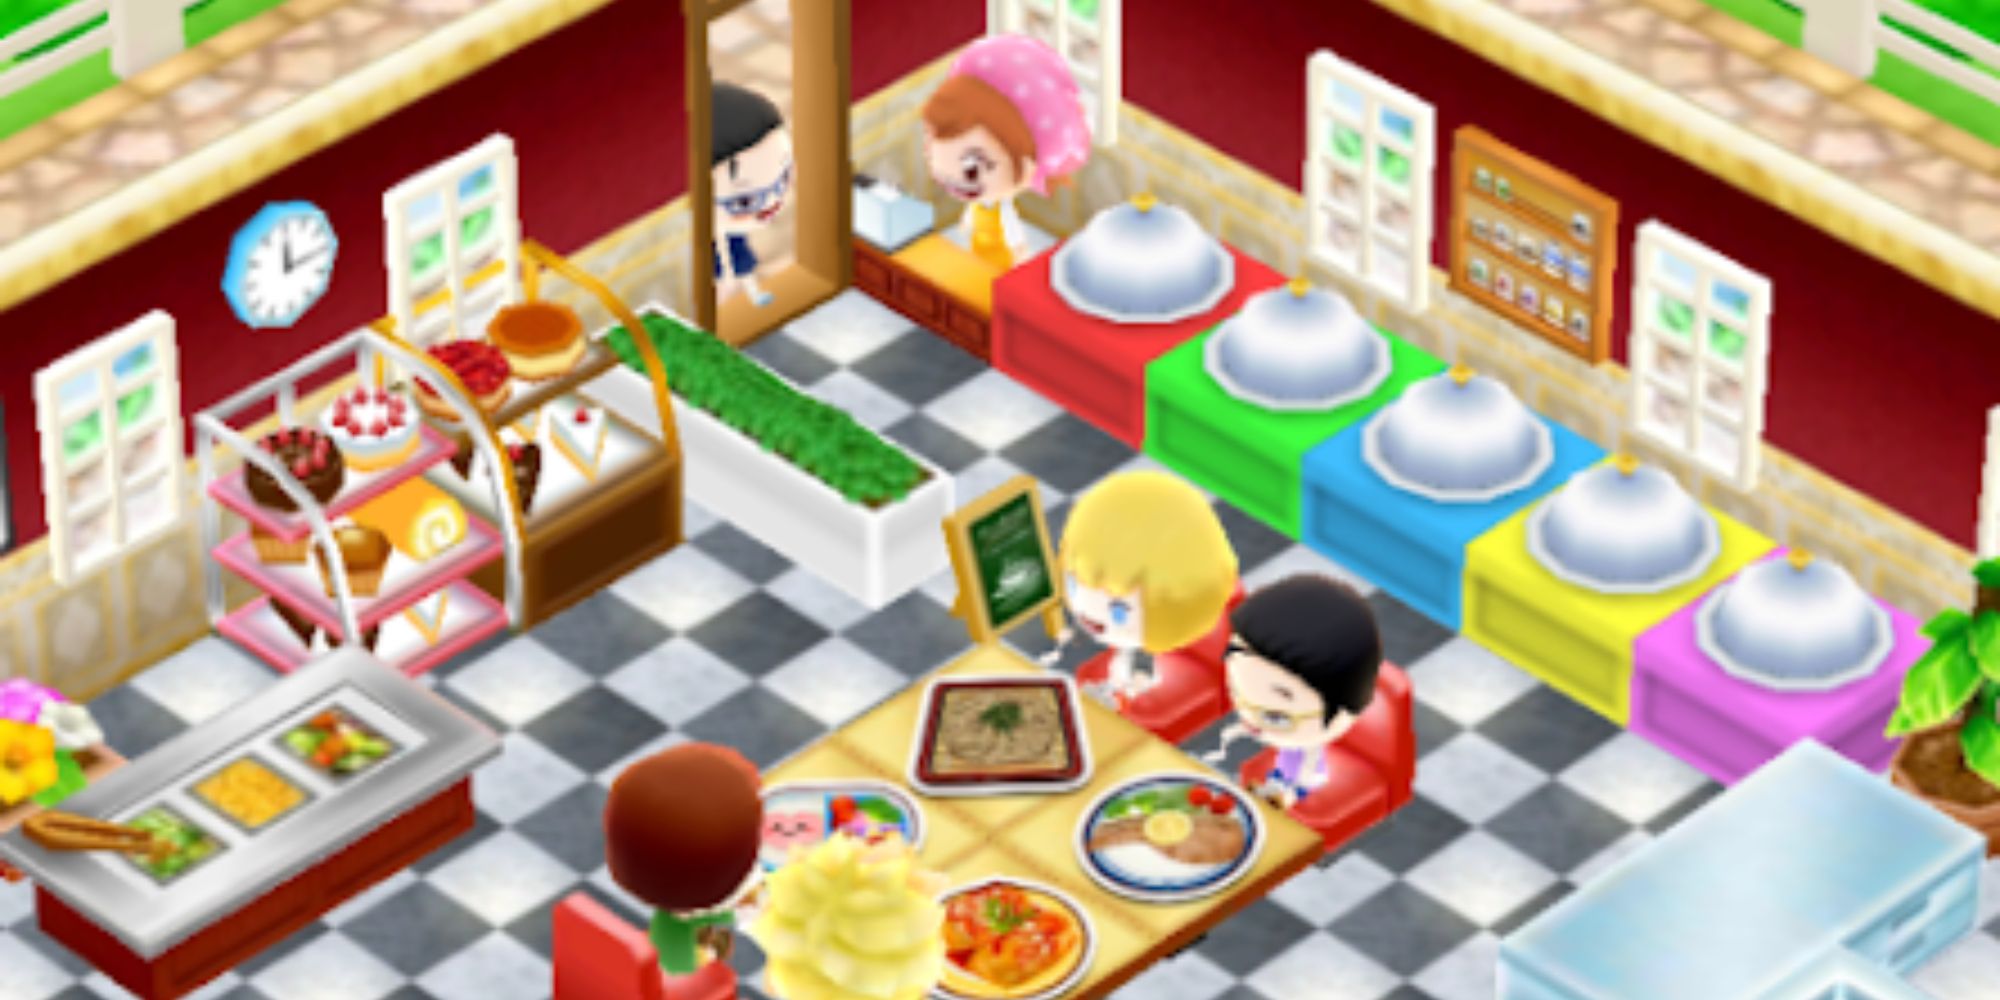 A screenshot featuring gameplay from Cooking Mama Let's cook!